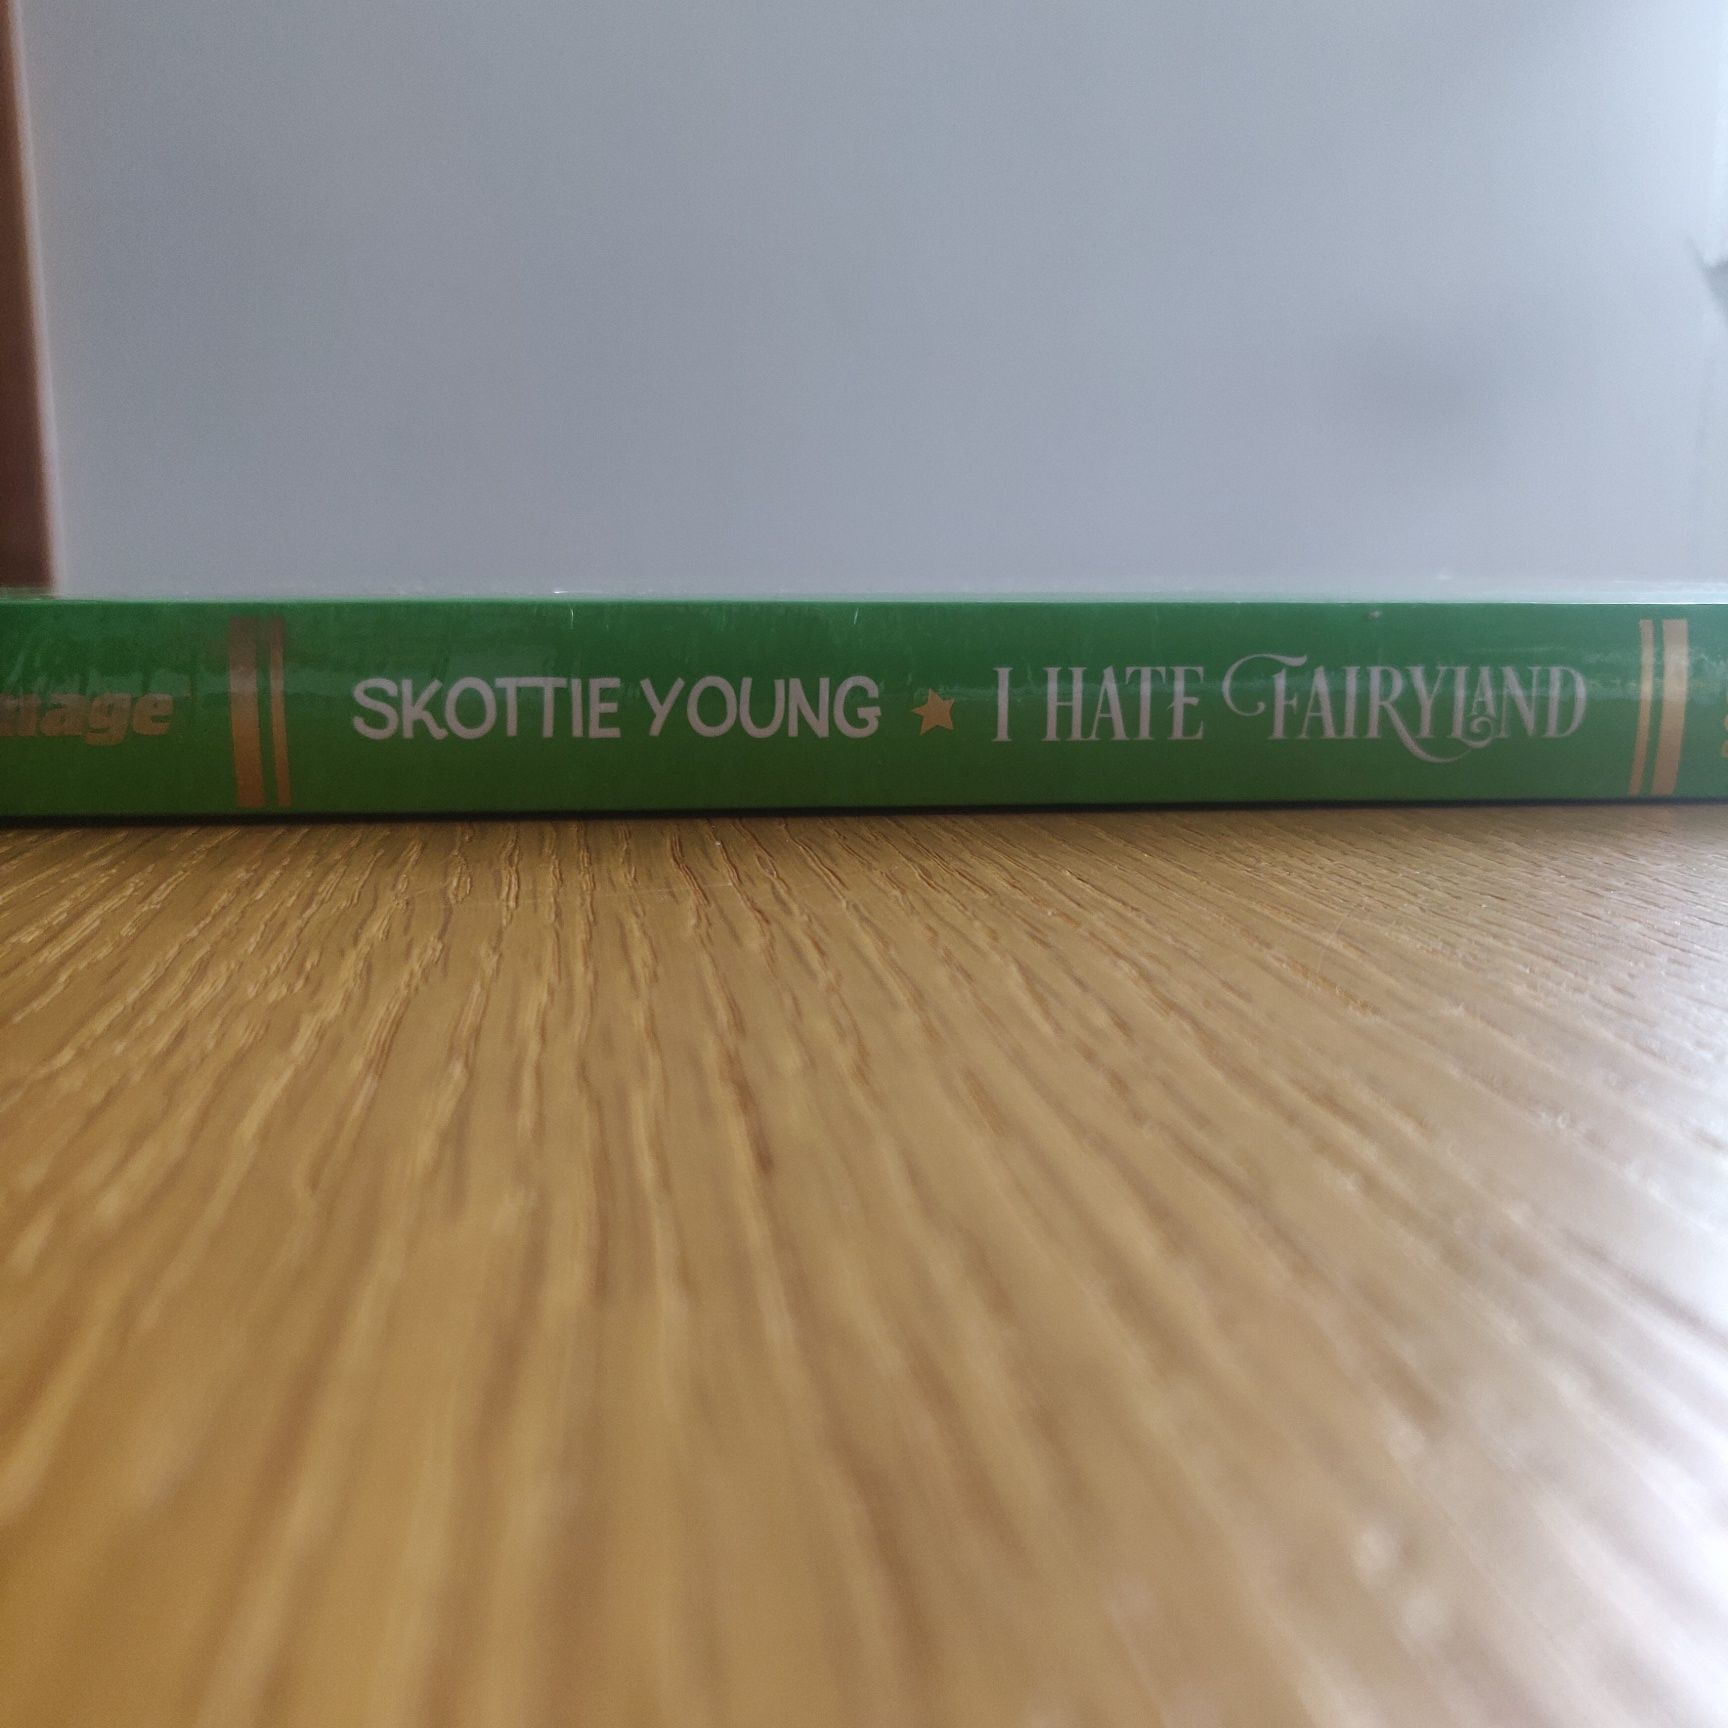 I hate fairyland - book two - skottie young